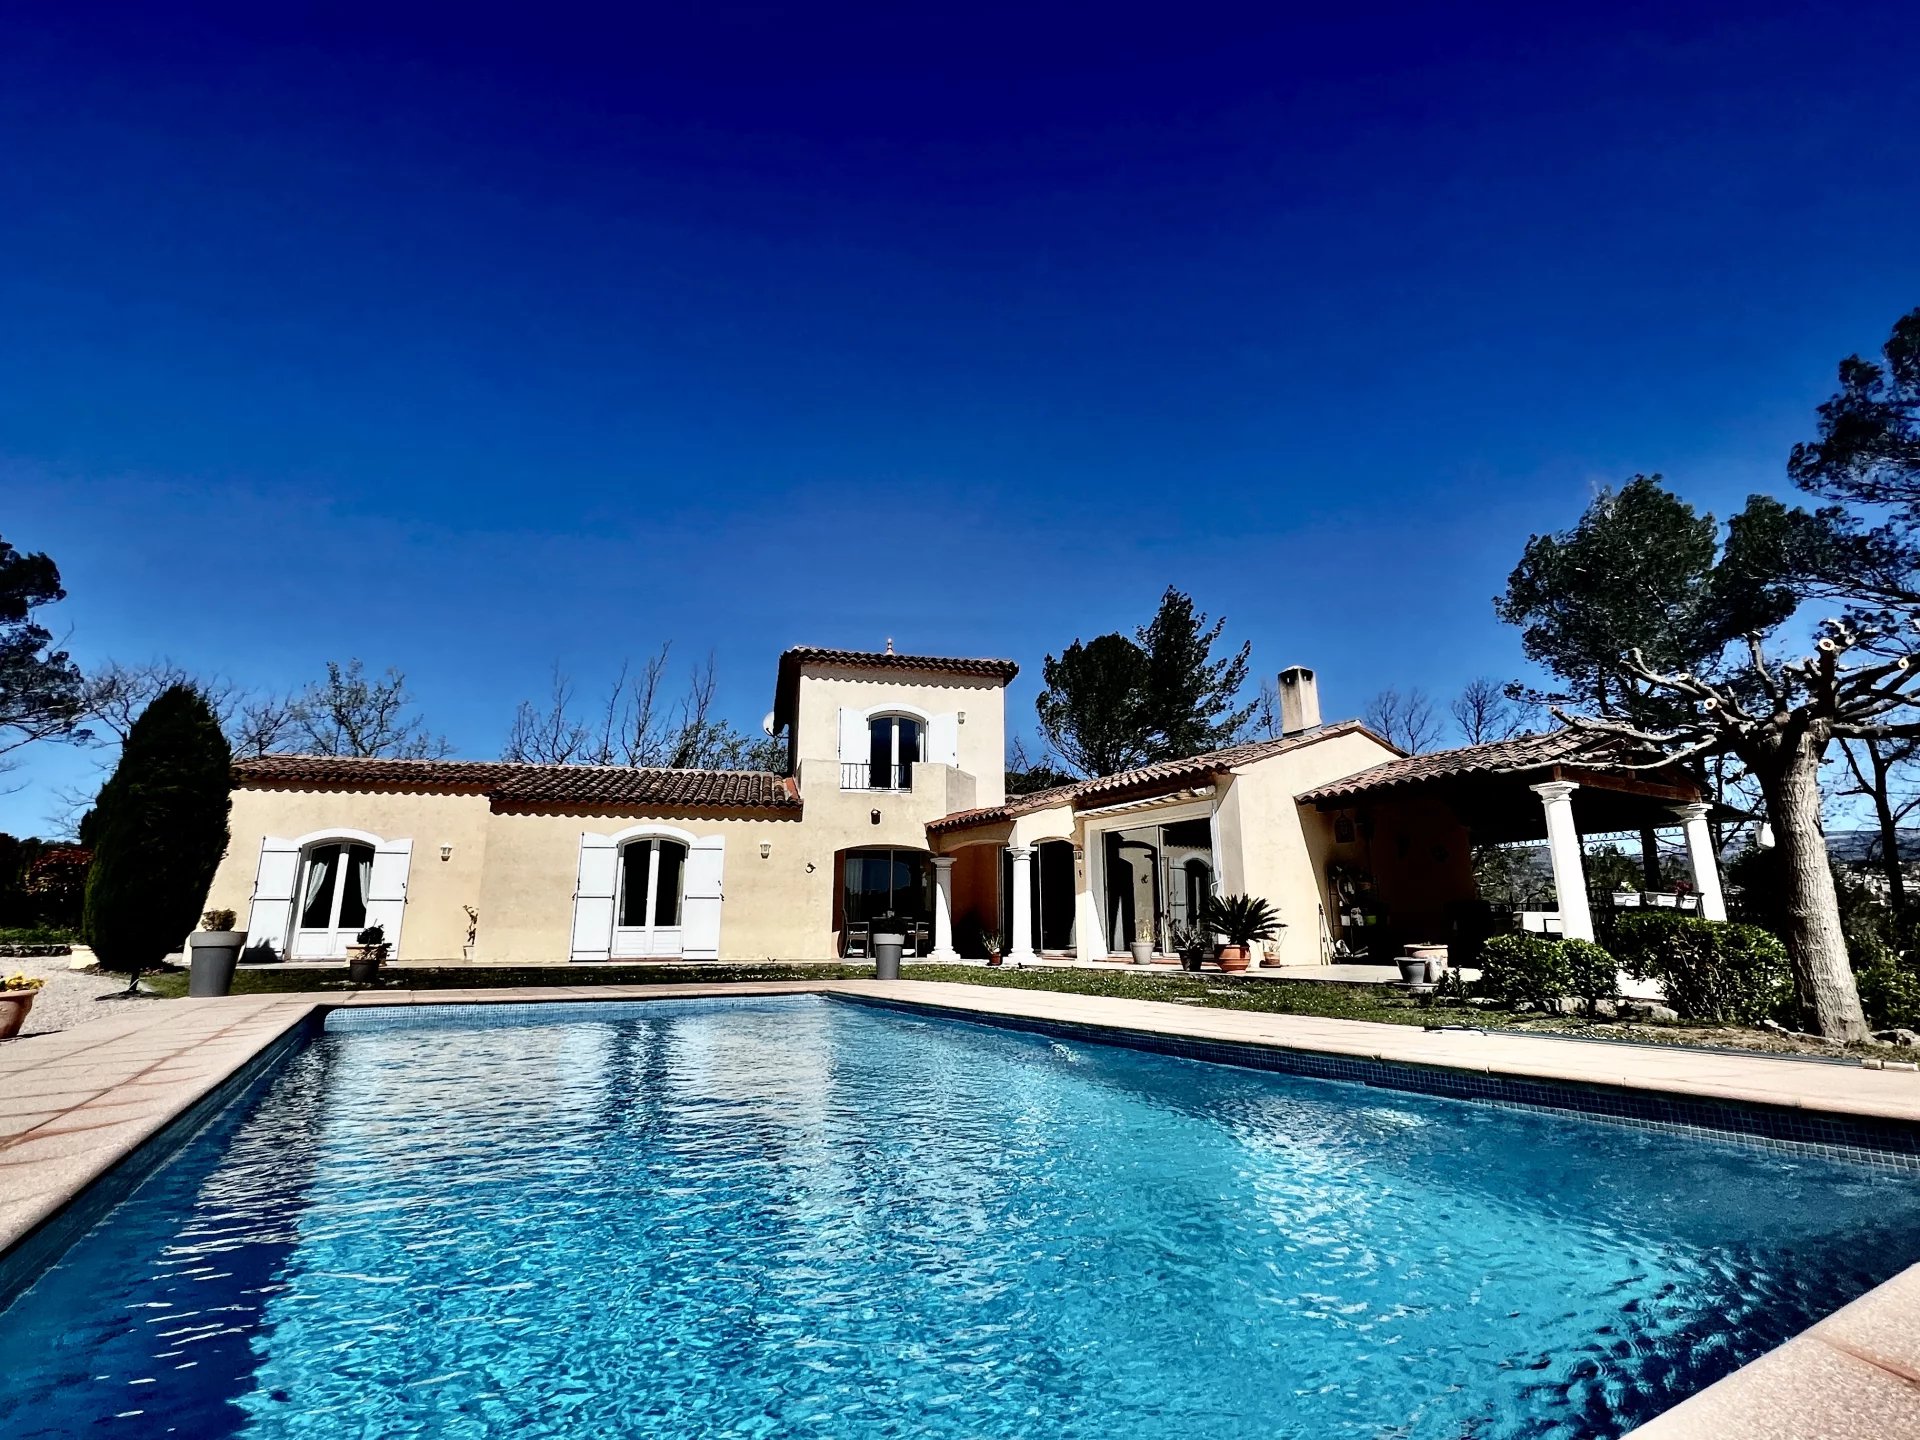 For sale in Fayence 3 bedrooms villa in a calm area and close to commodities